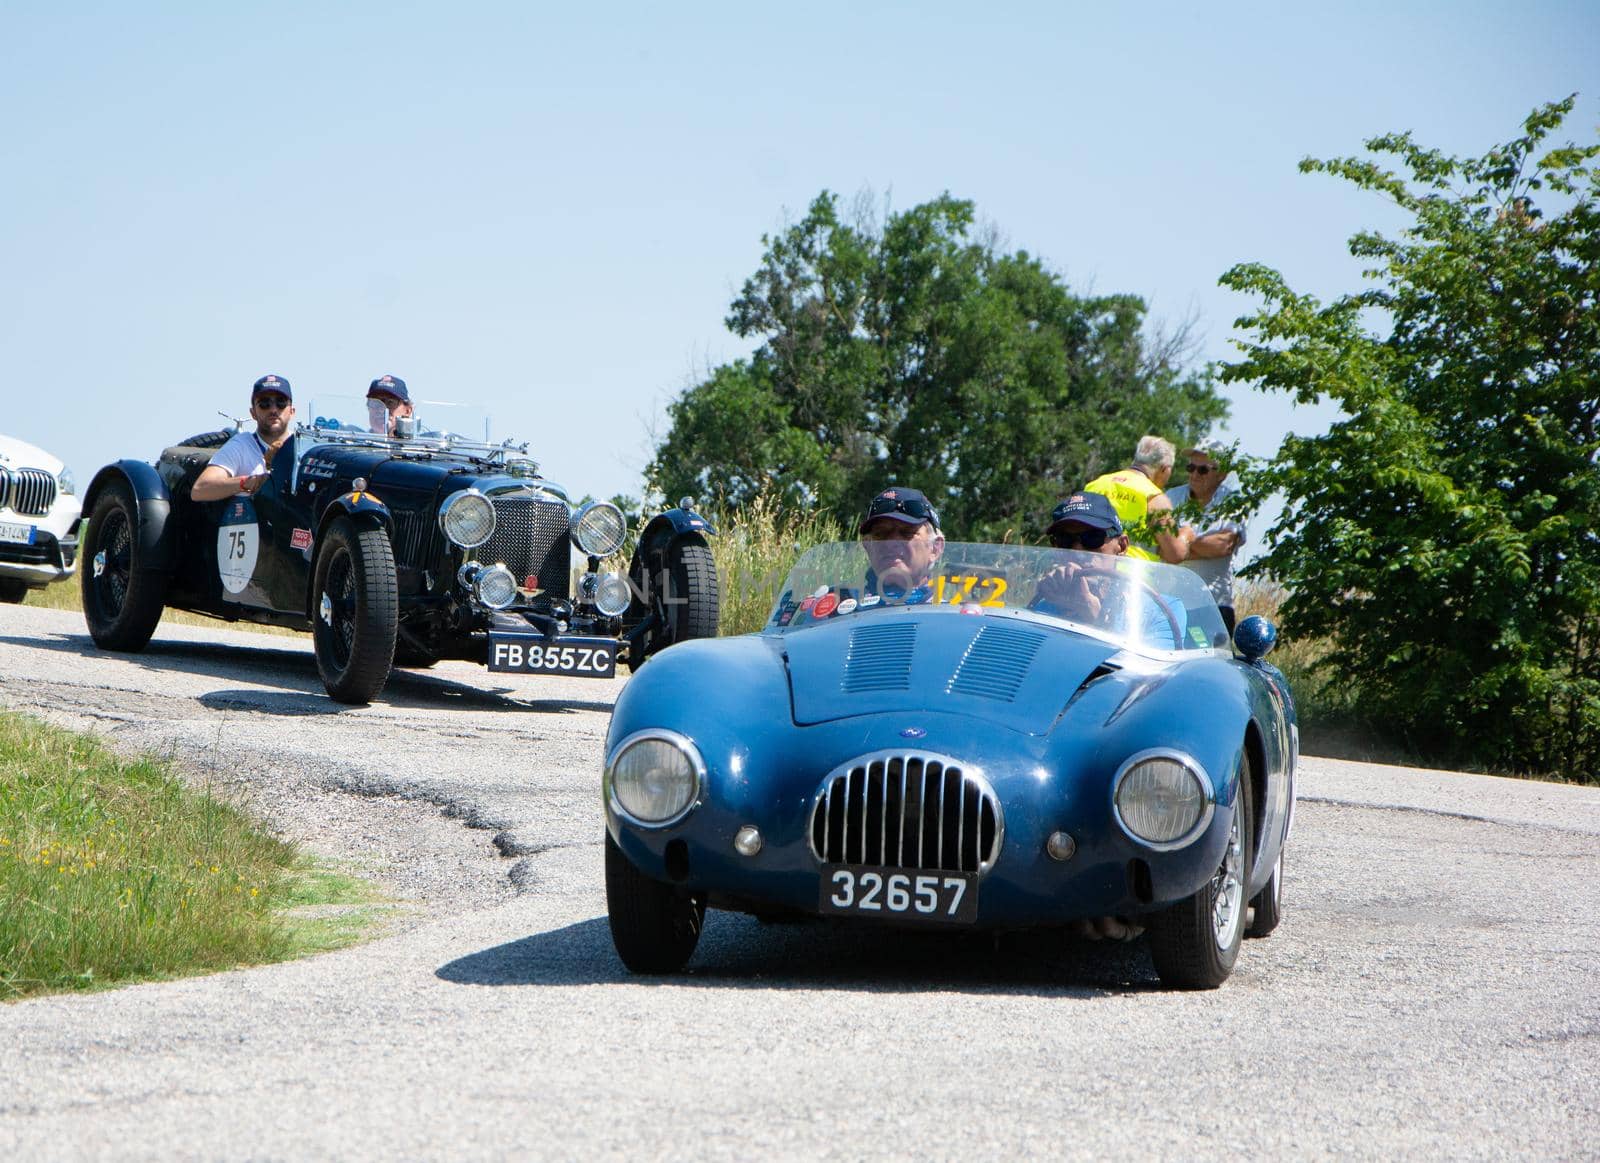 URBINO - ITALY - JUN 16 - 2022 : O.S.C.A. MT4 1350 2AD 1955 on an old racing car in rally Mille Miglia 2022 the famous italian historical race (1927-1957